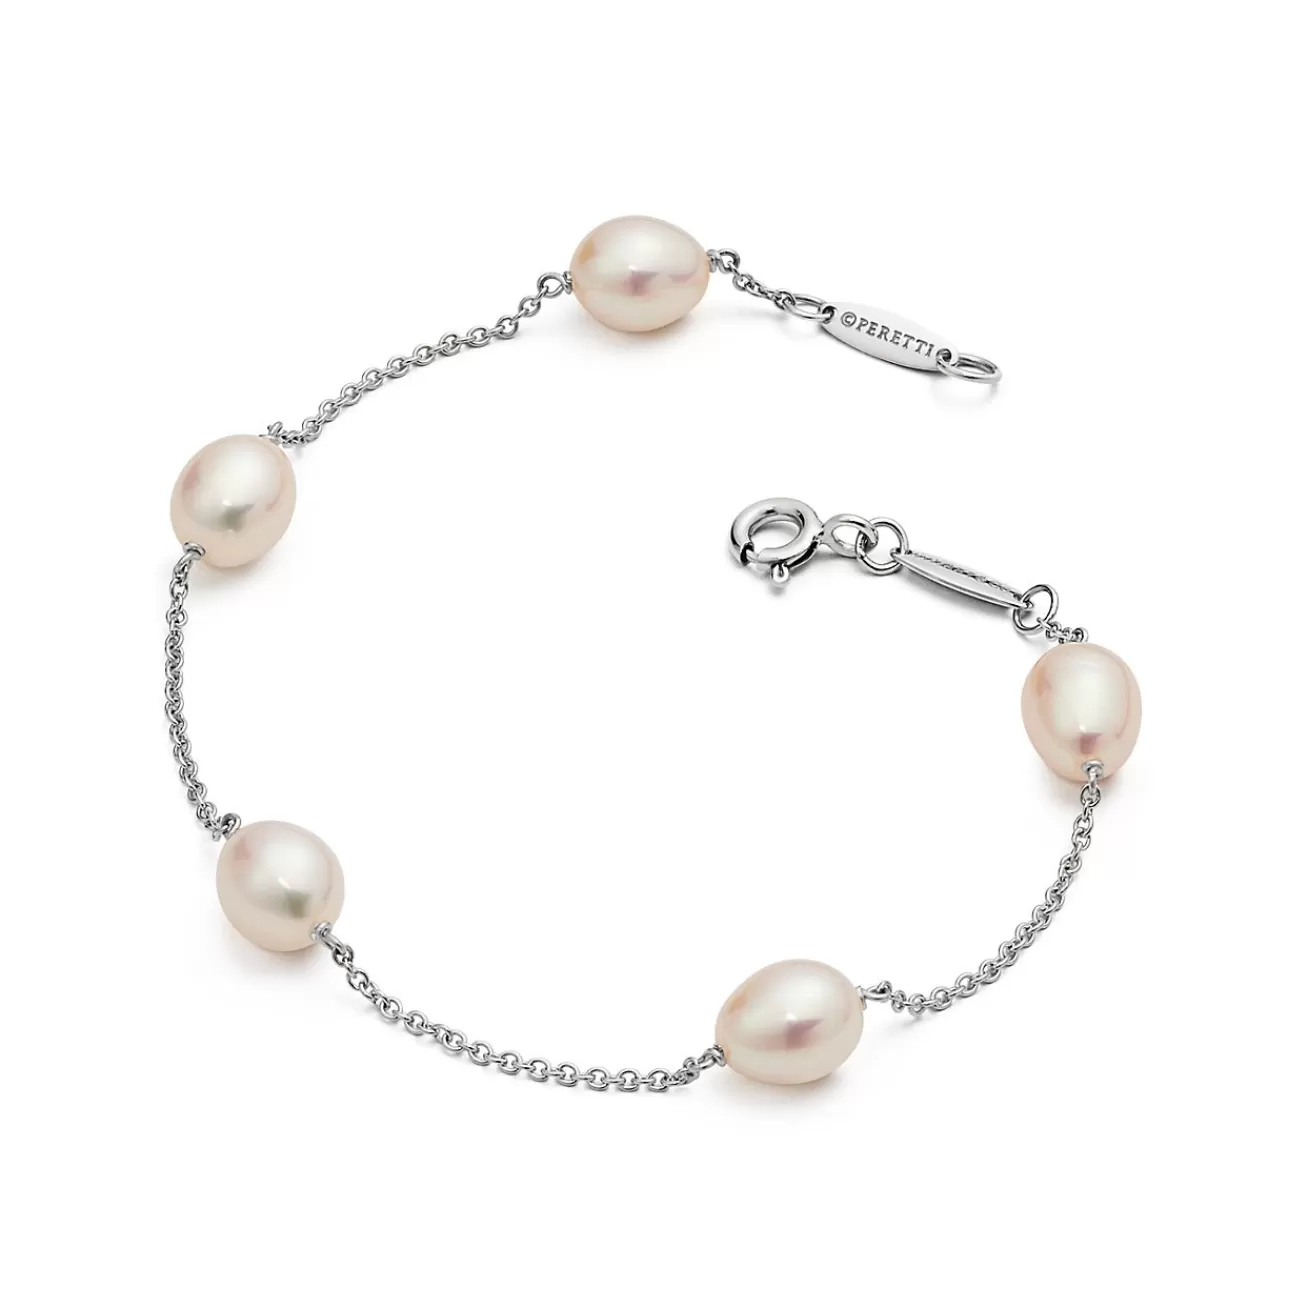 Tiffany & Co. Elsa Peretti® Pearls by the Yard™ bracelet in sterling silver. | ^ Bracelets | Gifts for Her